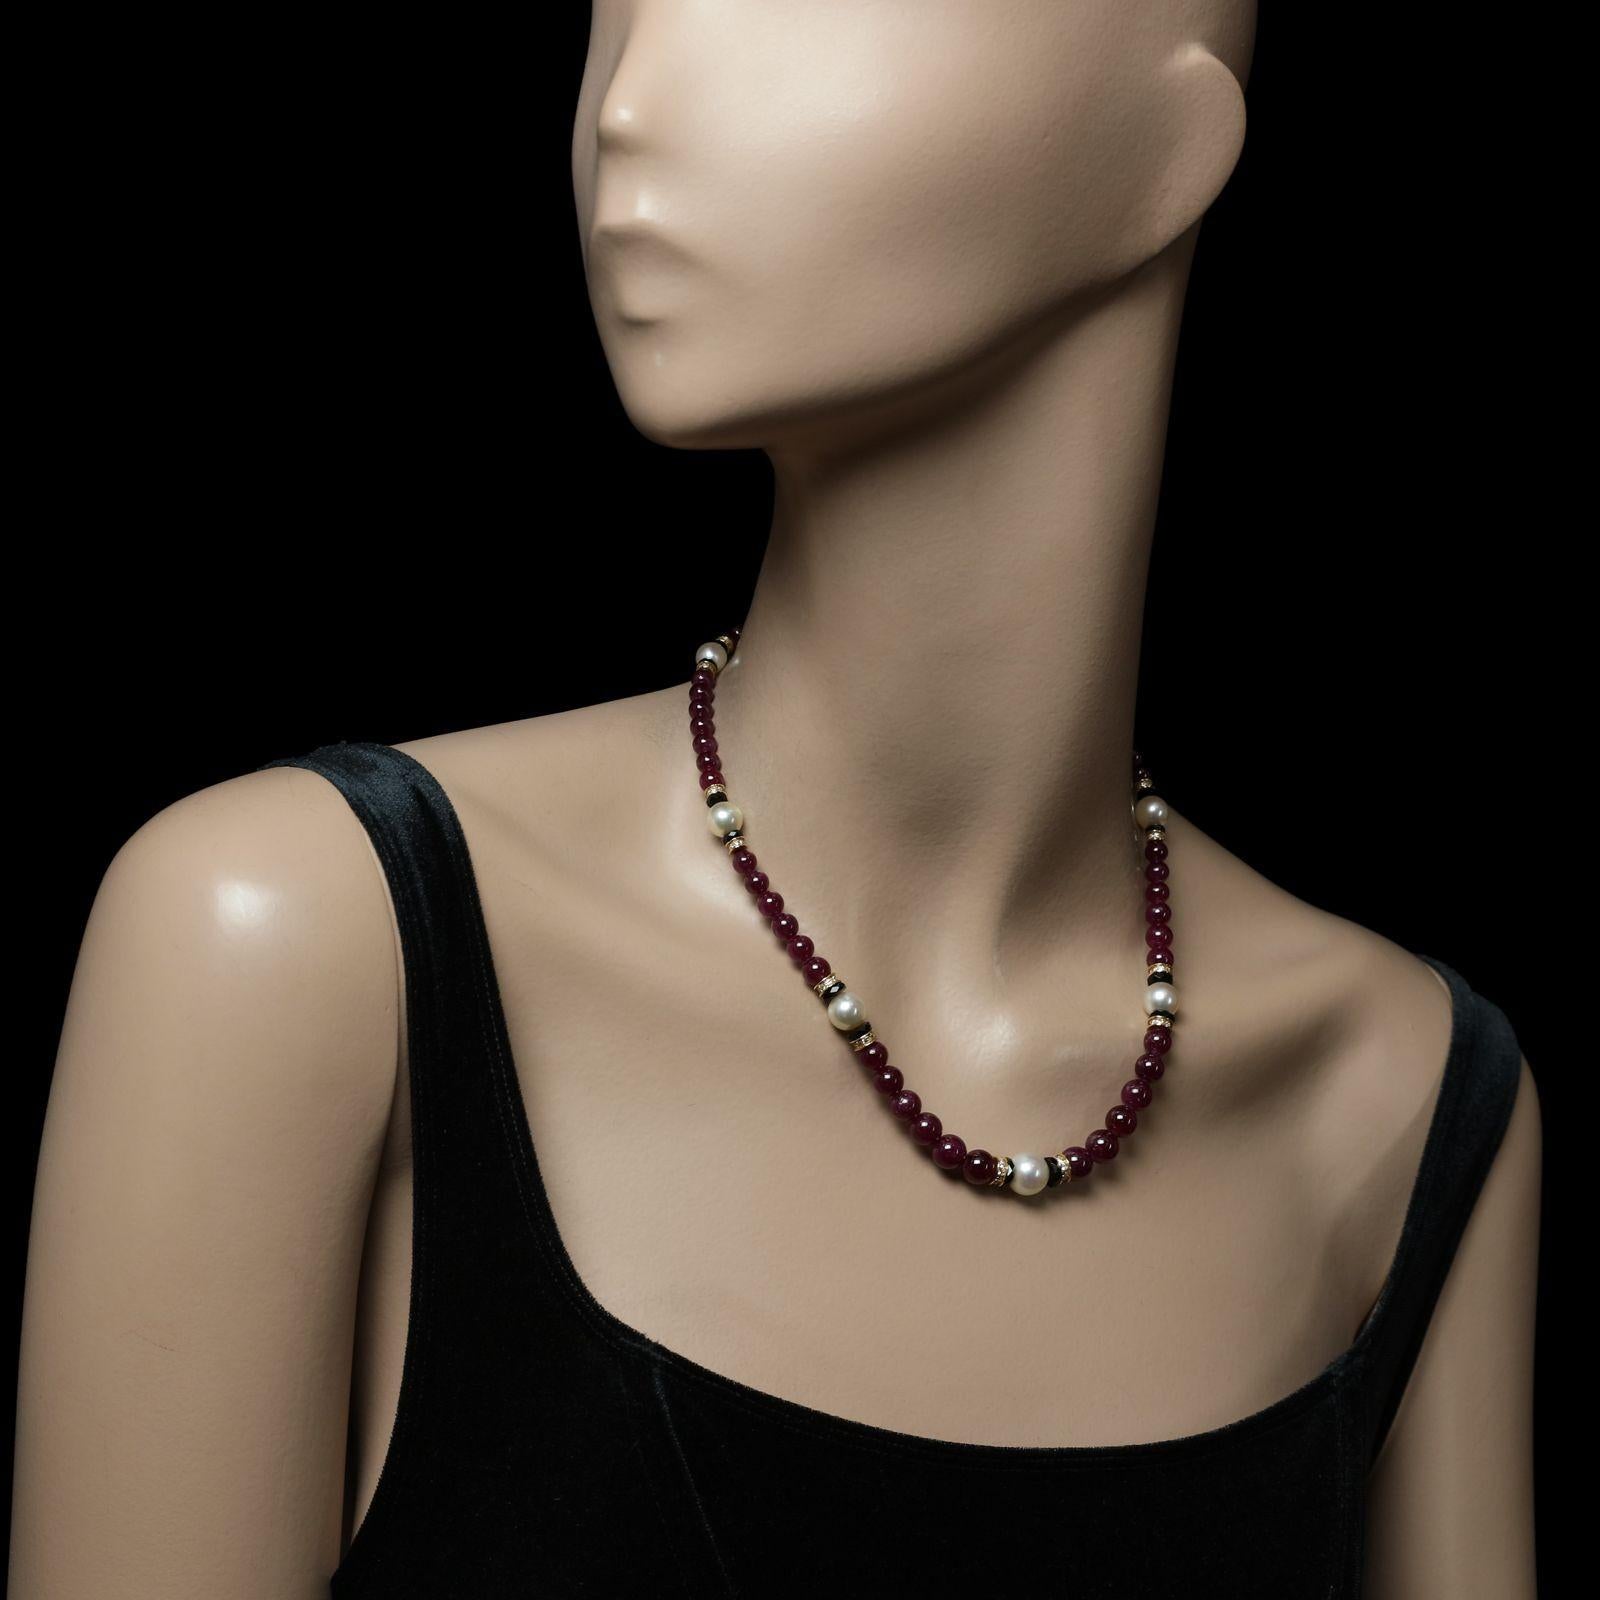 Women's or Men's Van Cleef & Arpels Ruby Bead Necklace with Pearls Onyx and Diamonds in 18ct Gold